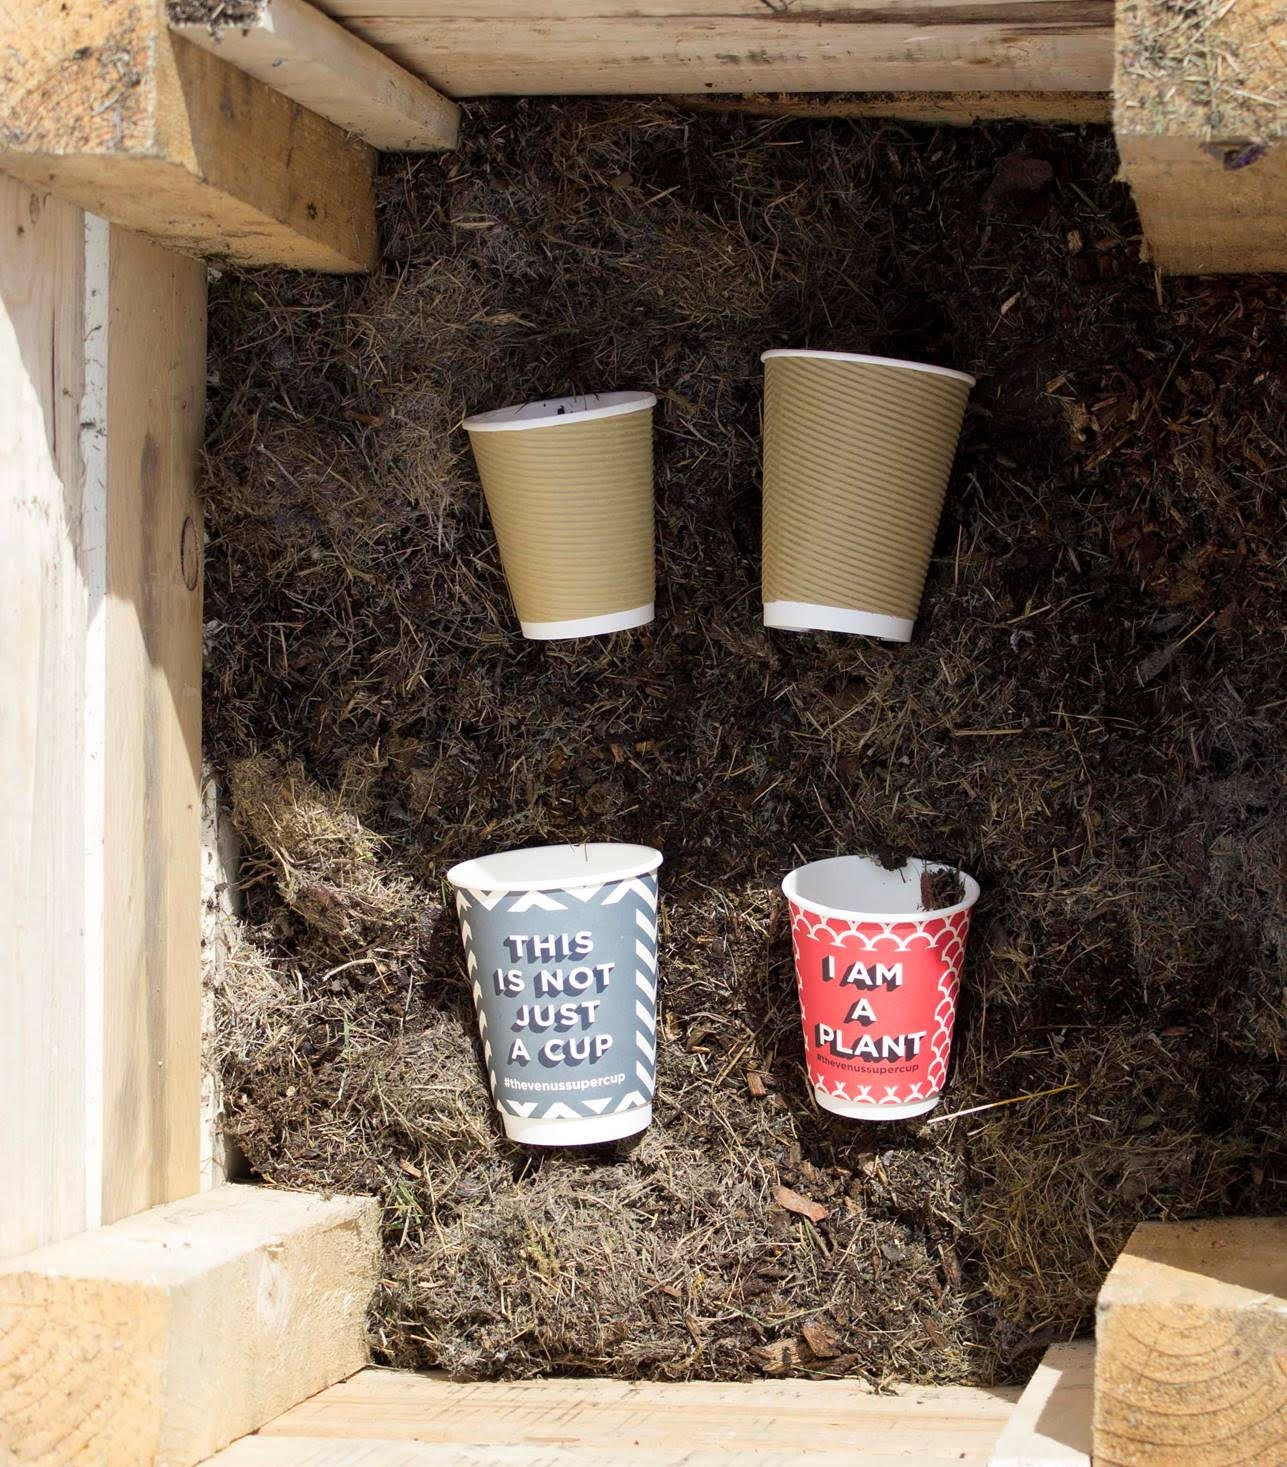 How does a coffee cup become compost?